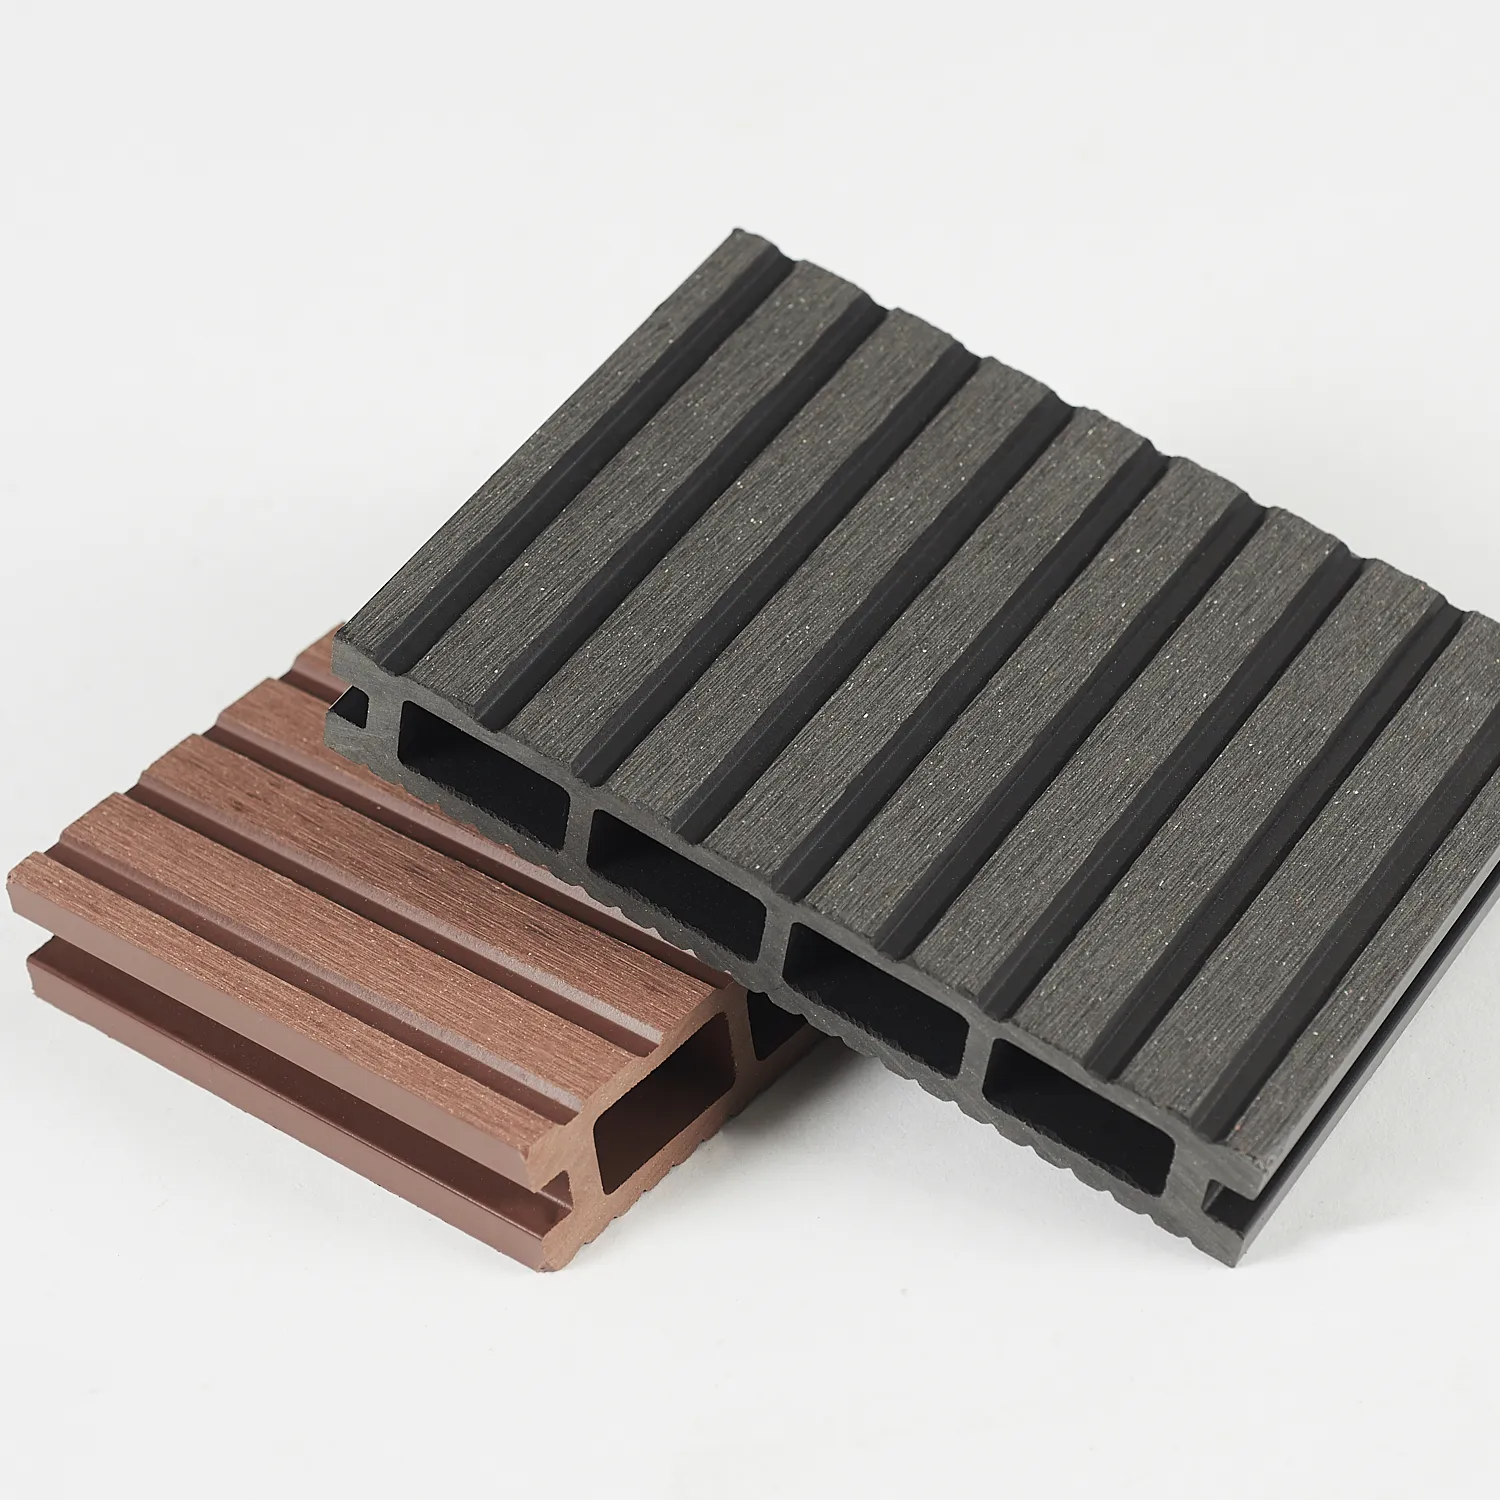 Weather Resistant Waterproof Garden Decking Composite Wood Plastic Co-Extrusion WPC Composite synthetic wooden decking